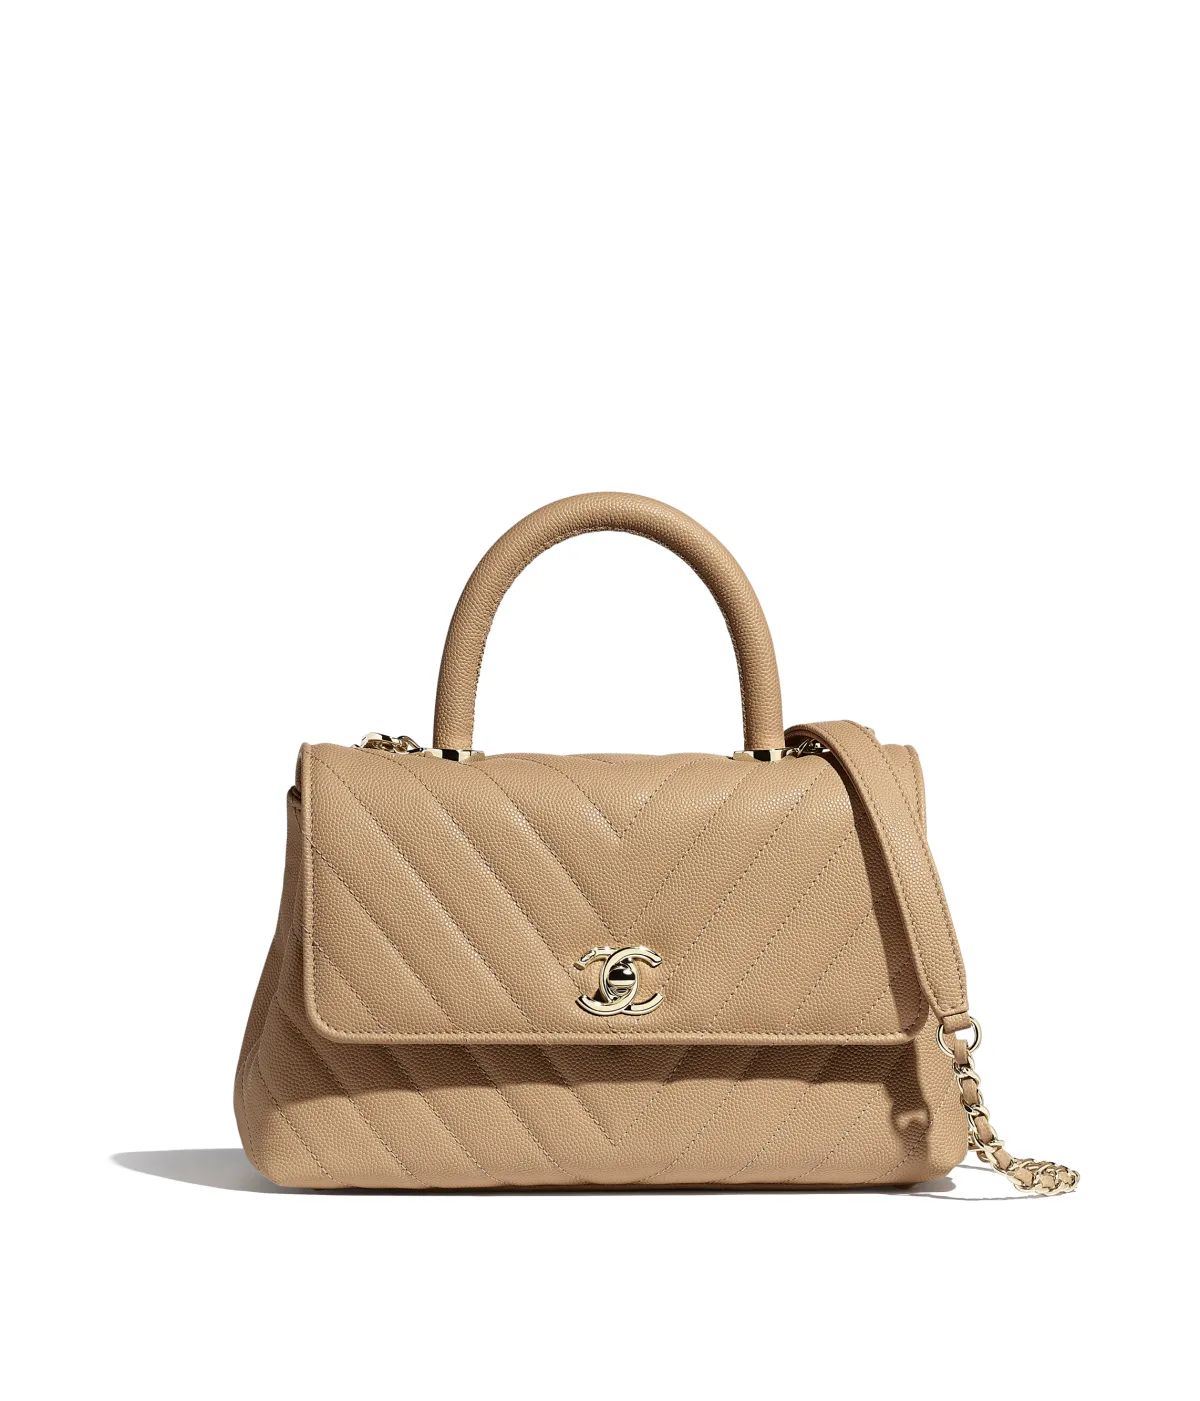 Small Flap Bag with Top Handle, grained calfskin & gold-tone metal, beige - CHANEL | Chanel, Inc. (US)